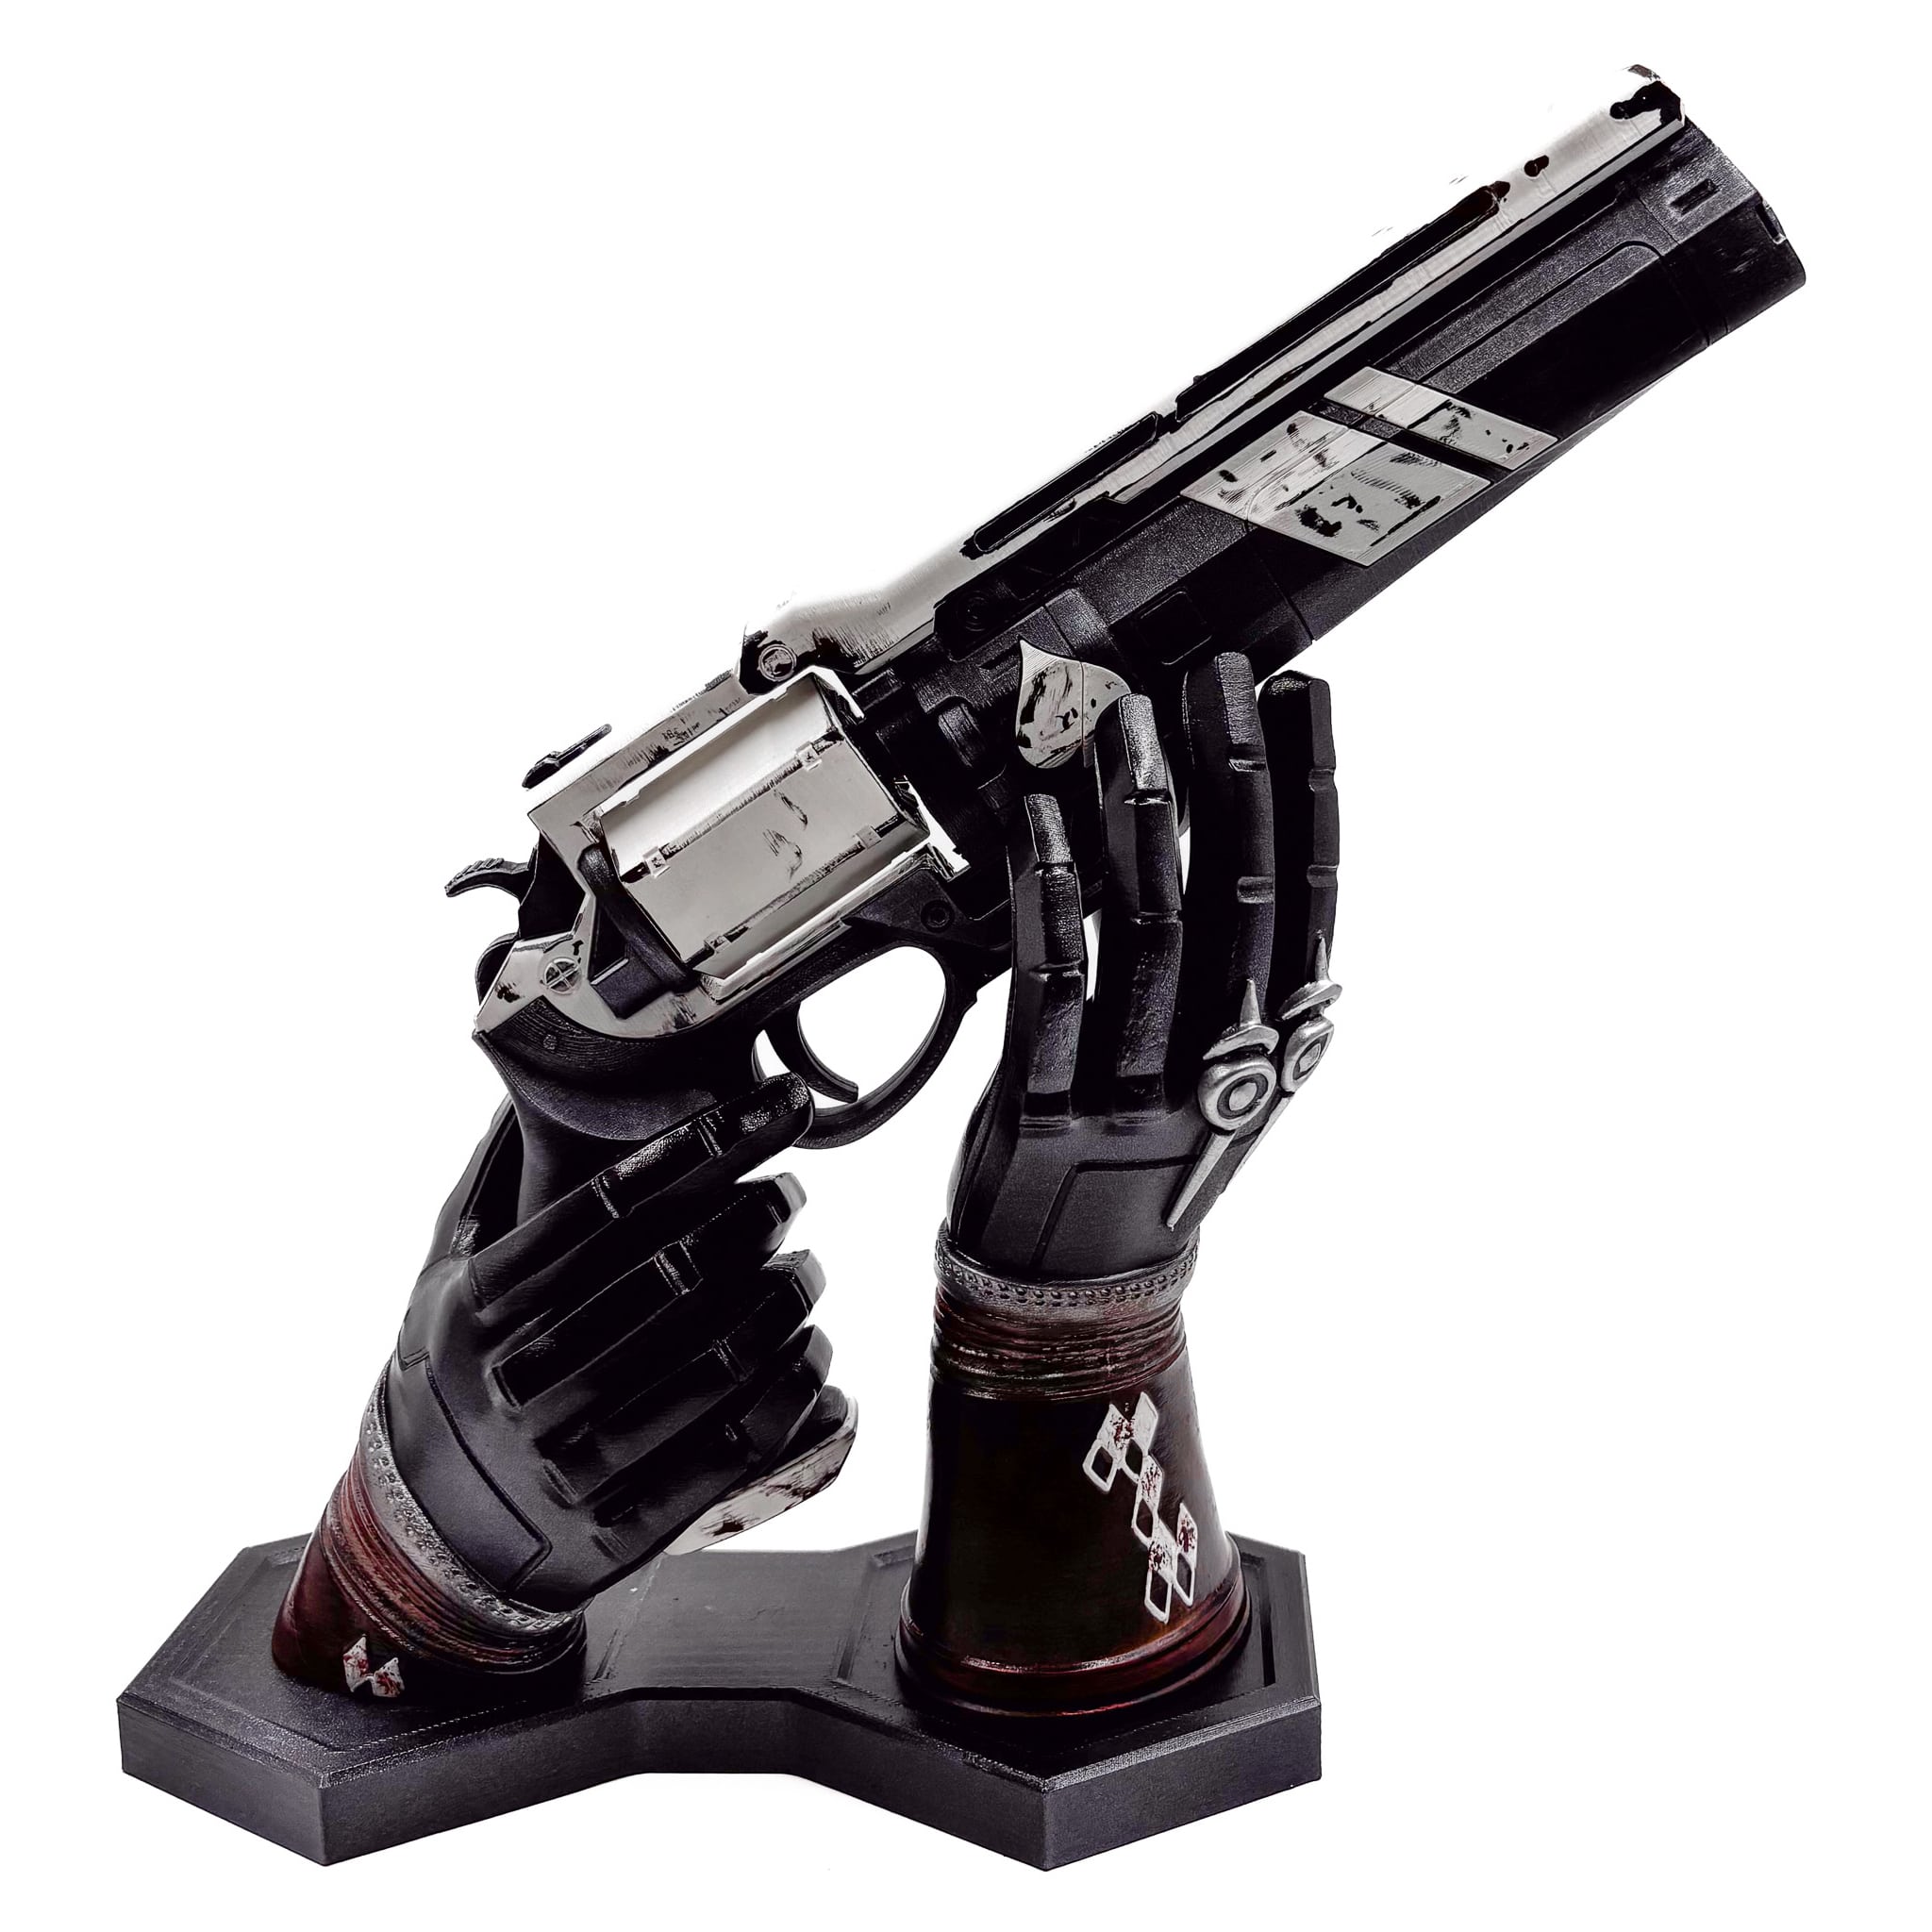 cayde 6 hands gloves stand with ace of spades replica gun by blasters4masters 1